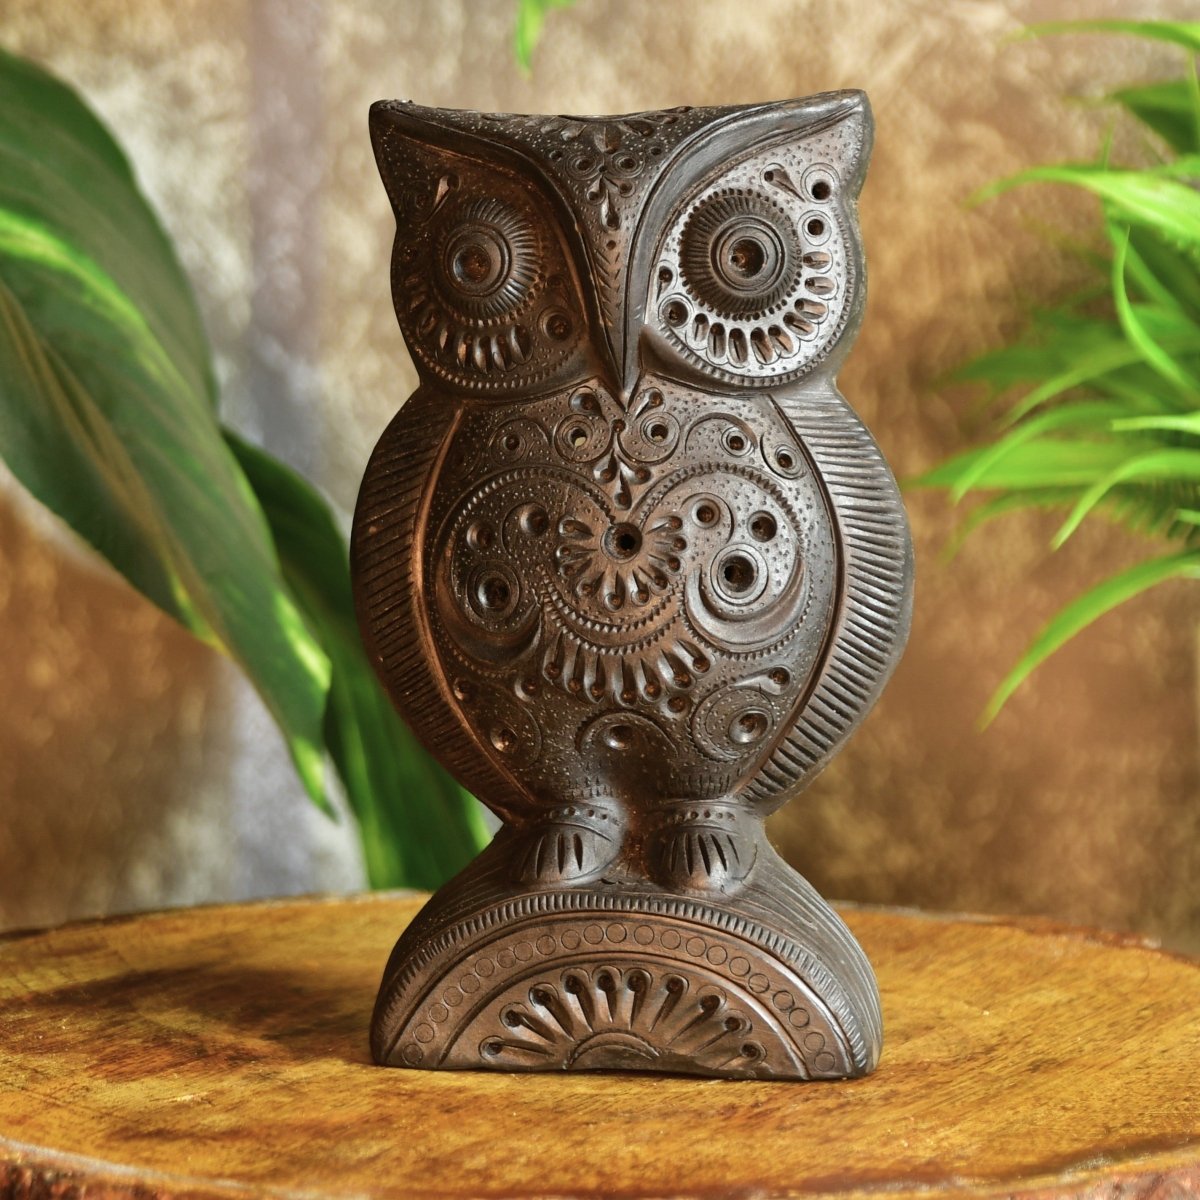 Vintage owl handcrafted to perfection -decor-Sowpeace-Vintage owl handcrafted to perfection -decor-Sowpeace-Vintage owl handcrafted to perfection-TerrbterTTAOW-Sowpeace-TerrbterTTAOW-Sowpeace